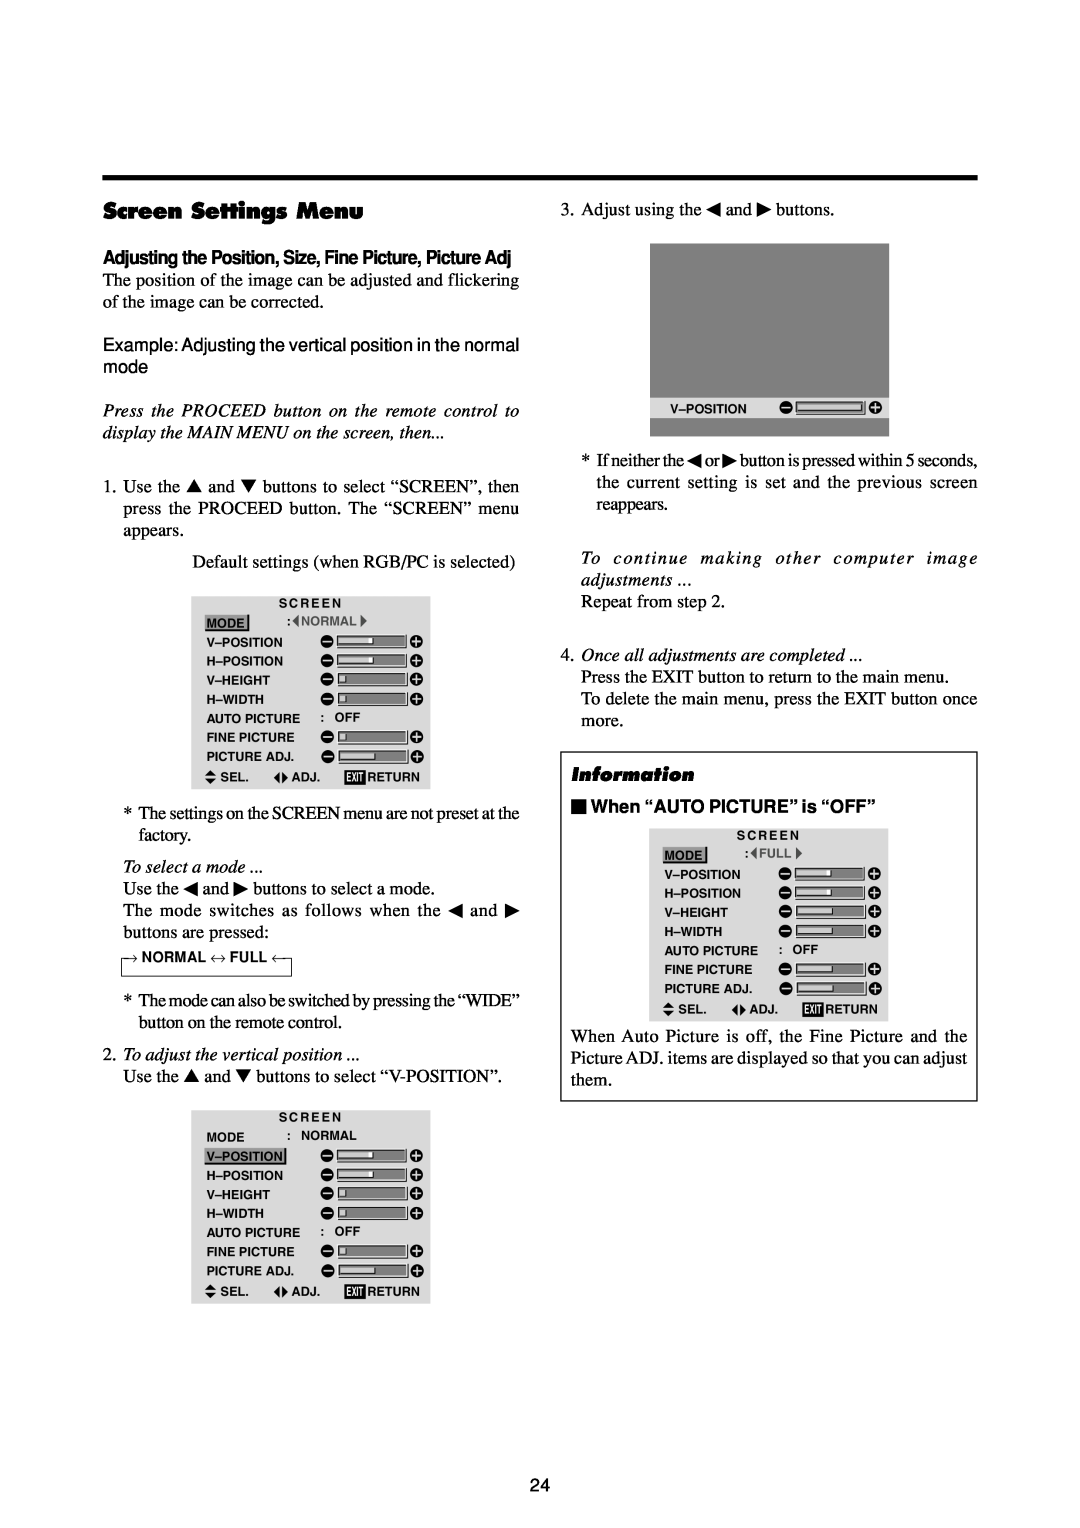 Marantz PD4293D manual Screen Settings Menu, Adjusting the Position, Size, Fine Picture, Picture Adj, To select a mode 